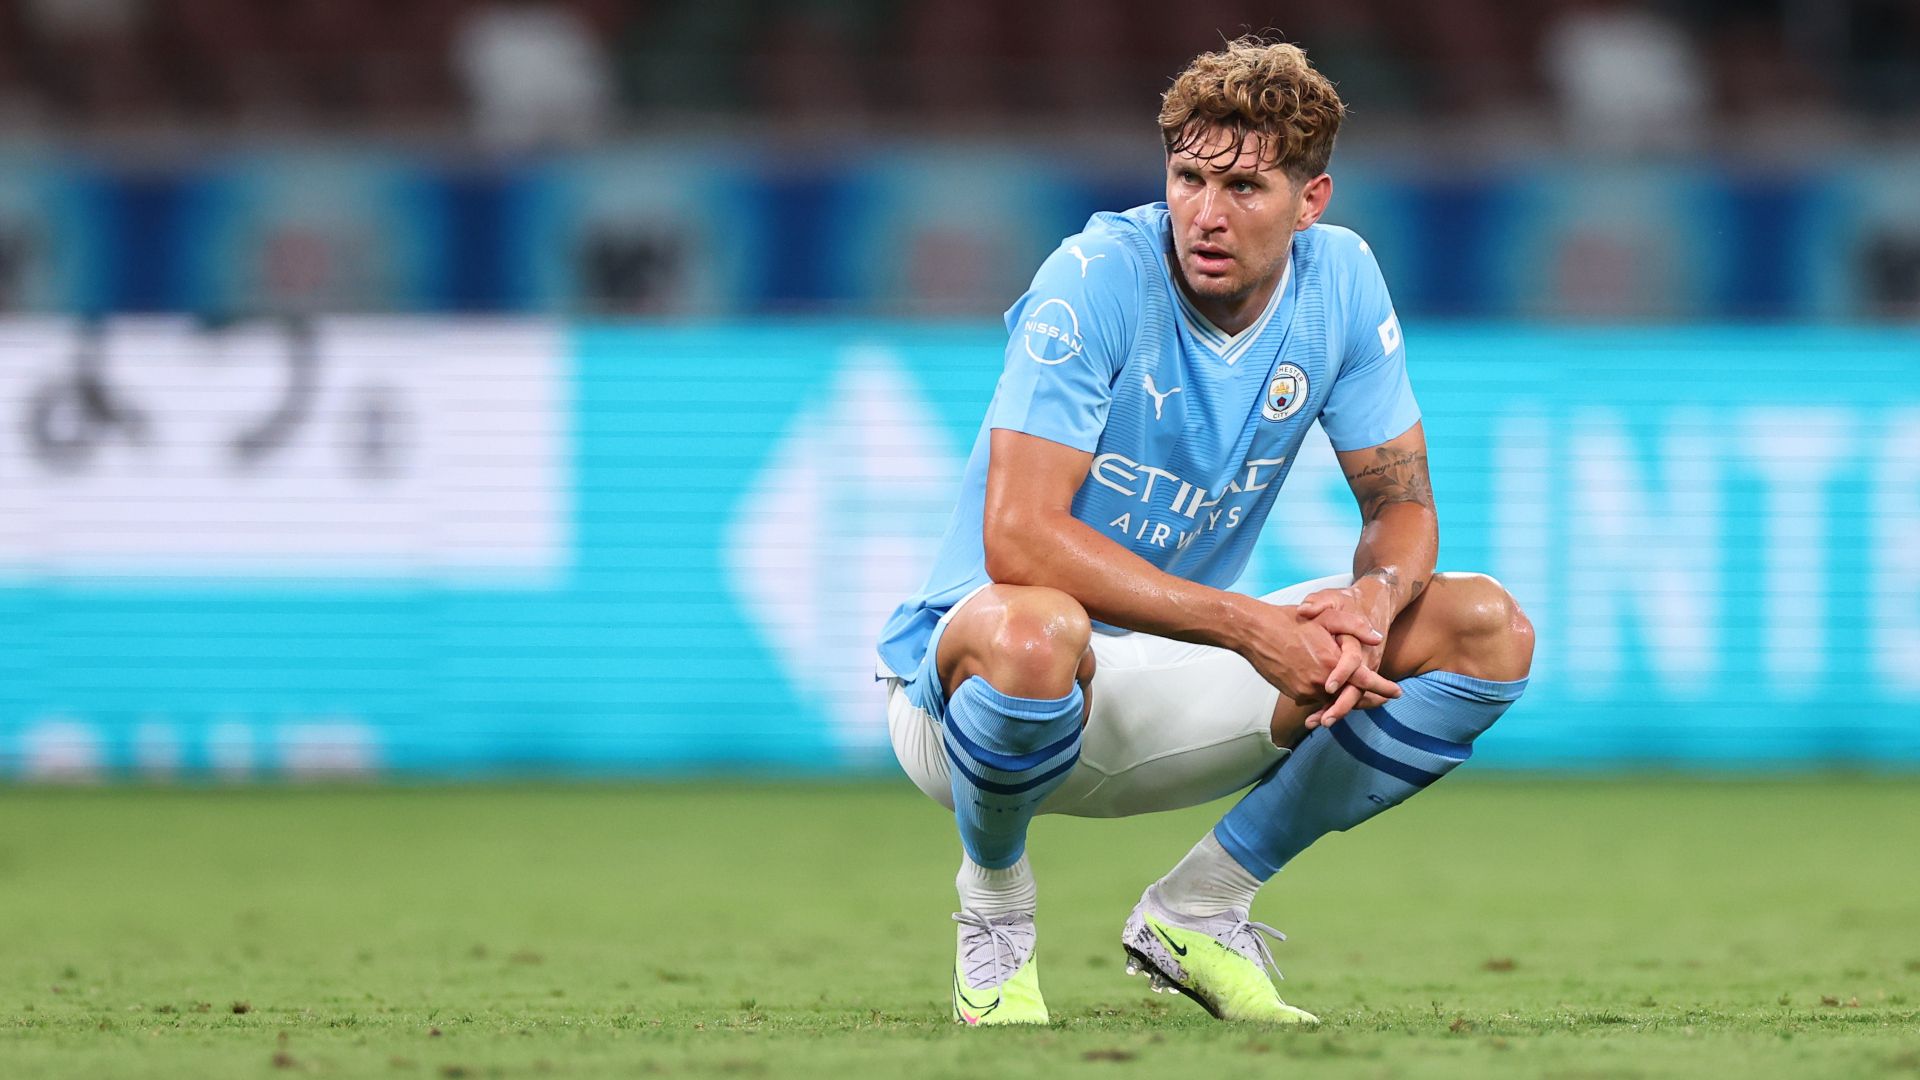 Football Today, August 21, 2023: Manchester City defender John Stones ruled out until after international break